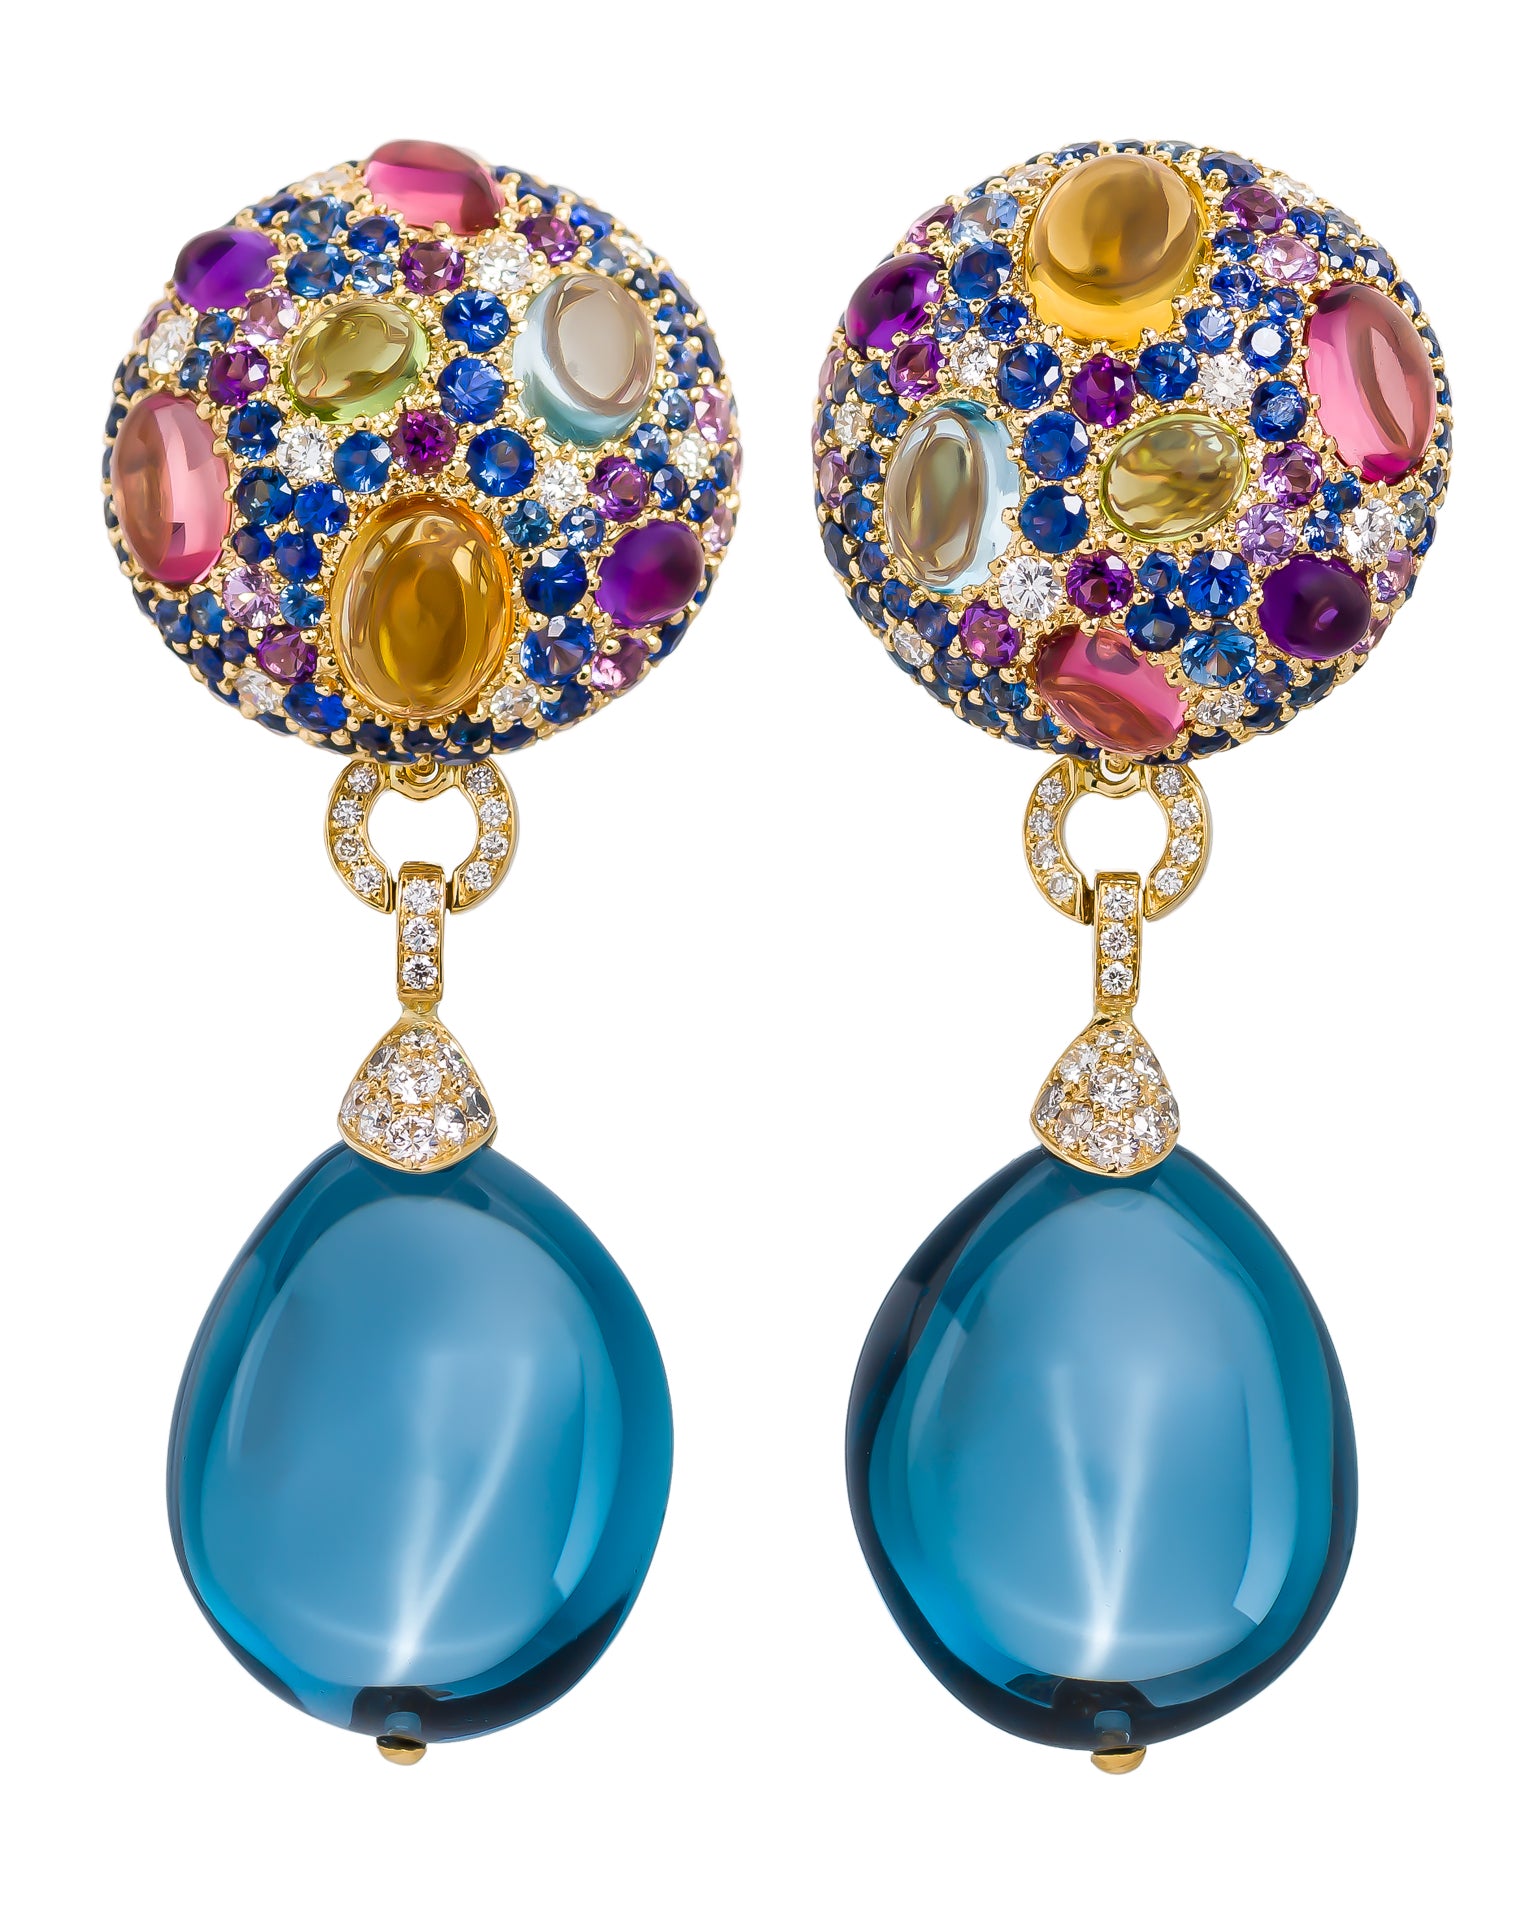 Blue Topaz cookie drop earrings enhanced with a myriad of gemstones and diamonds, crafted in 18 karat yellow gold